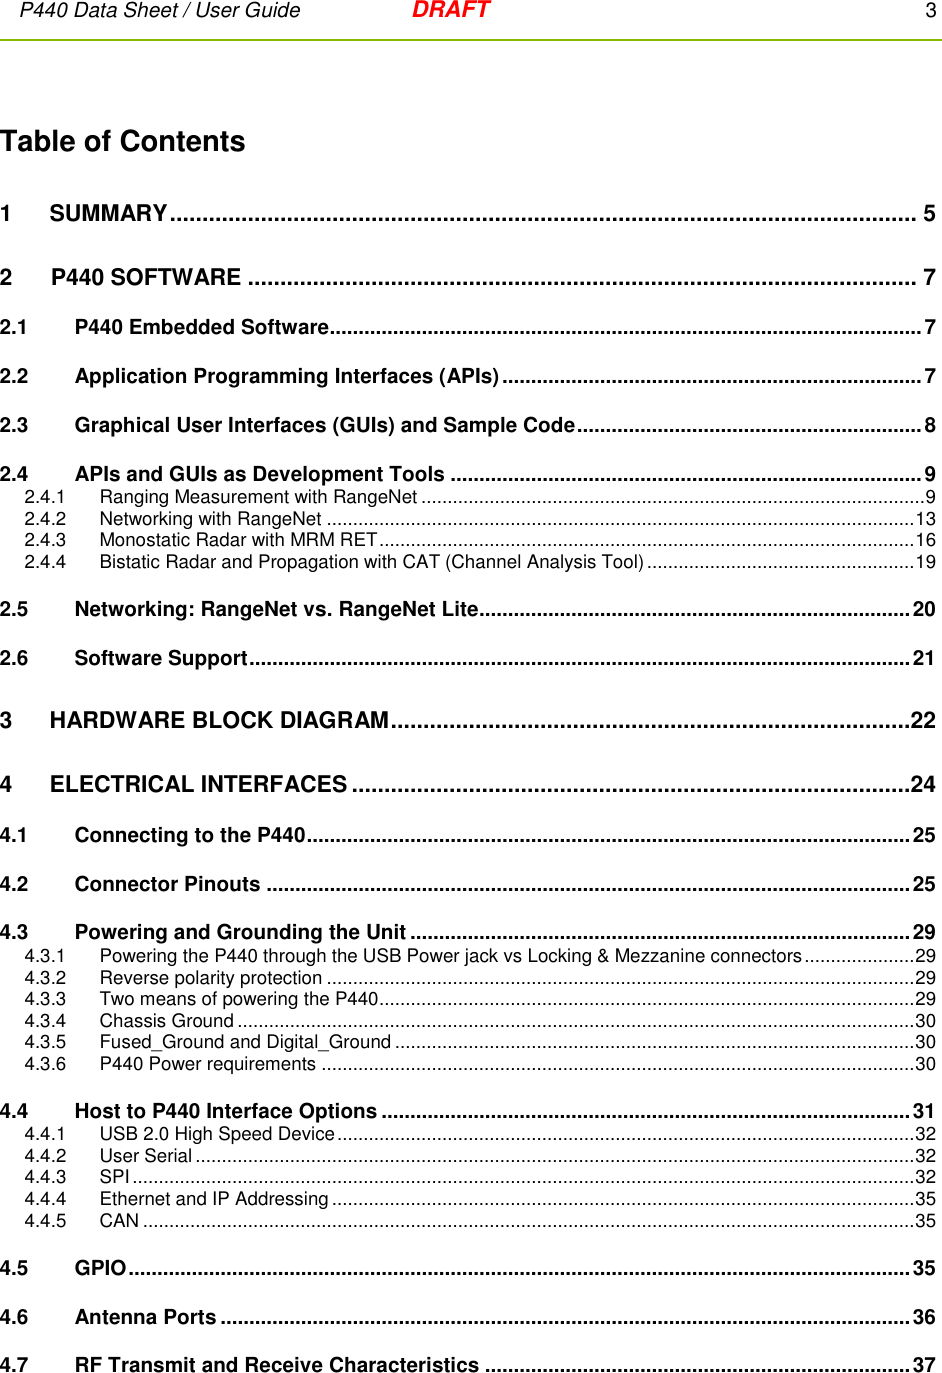 P440 Data Sheet / User Guide   DRAFT    3         Table of Contents 1 SUMMARY ................................................................................................................... 5 2      P440 SOFTWARE ....................................................................................................... 7 2.1  P440 Embedded Software ....................................................................................................... 7 2.2 Application Programming Interfaces (APIs) ......................................................................... 7 2.3 Graphical User Interfaces (GUIs) and Sample Code ............................................................ 8 2.4 APIs and GUIs as Development Tools .................................................................................. 9 2.4.1  Ranging Measurement with RangeNet ................................................................................................ 9 2.4.2  Networking with RangeNet ................................................................................................................ 13 2.4.3  Monostatic Radar with MRM RET ...................................................................................................... 16 2.4.4  Bistatic Radar and Propagation with CAT (Channel Analysis Tool) ................................................... 19 2.5 Networking: RangeNet vs. RangeNet Lite ........................................................................... 20 2.6 Software Support ................................................................................................................... 21 3 HARDWARE BLOCK DIAGRAM ................................................................................22 4 ELECTRICAL INTERFACES ......................................................................................24 4.1 Connecting to the P440 ......................................................................................................... 25 4.2 Connector Pinouts ................................................................................................................ 25 4.3 Powering and Grounding the Unit ....................................................................................... 29 4.3.1   Powering the P440 through the USB Power jack vs Locking &amp; Mezzanine connectors ..................... 29 4.3.2  Reverse polarity protection ................................................................................................................ 29 4.3.3  Two means of powering the P440 ...................................................................................................... 29 4.3.4  Chassis Ground ................................................................................................................................. 30 4.3.5  Fused_Ground and Digital_Ground ................................................................................................... 30 4.3.6  P440 Power requirements ................................................................................................................. 30 4.4 Host to P440 Interface Options ............................................................................................ 31 4.4.1  USB 2.0 High Speed Device .............................................................................................................. 32 4.4.2  User Serial ......................................................................................................................................... 32 4.4.3  SPI ..................................................................................................................................................... 32 4.4.4  Ethernet and IP Addressing ............................................................................................................... 35 4.4.5  CAN ................................................................................................................................................... 35 4.5 GPIO ........................................................................................................................................ 35 4.6 Antenna Ports ........................................................................................................................ 36 4.7 RF Transmit and Receive Characteristics .......................................................................... 37 